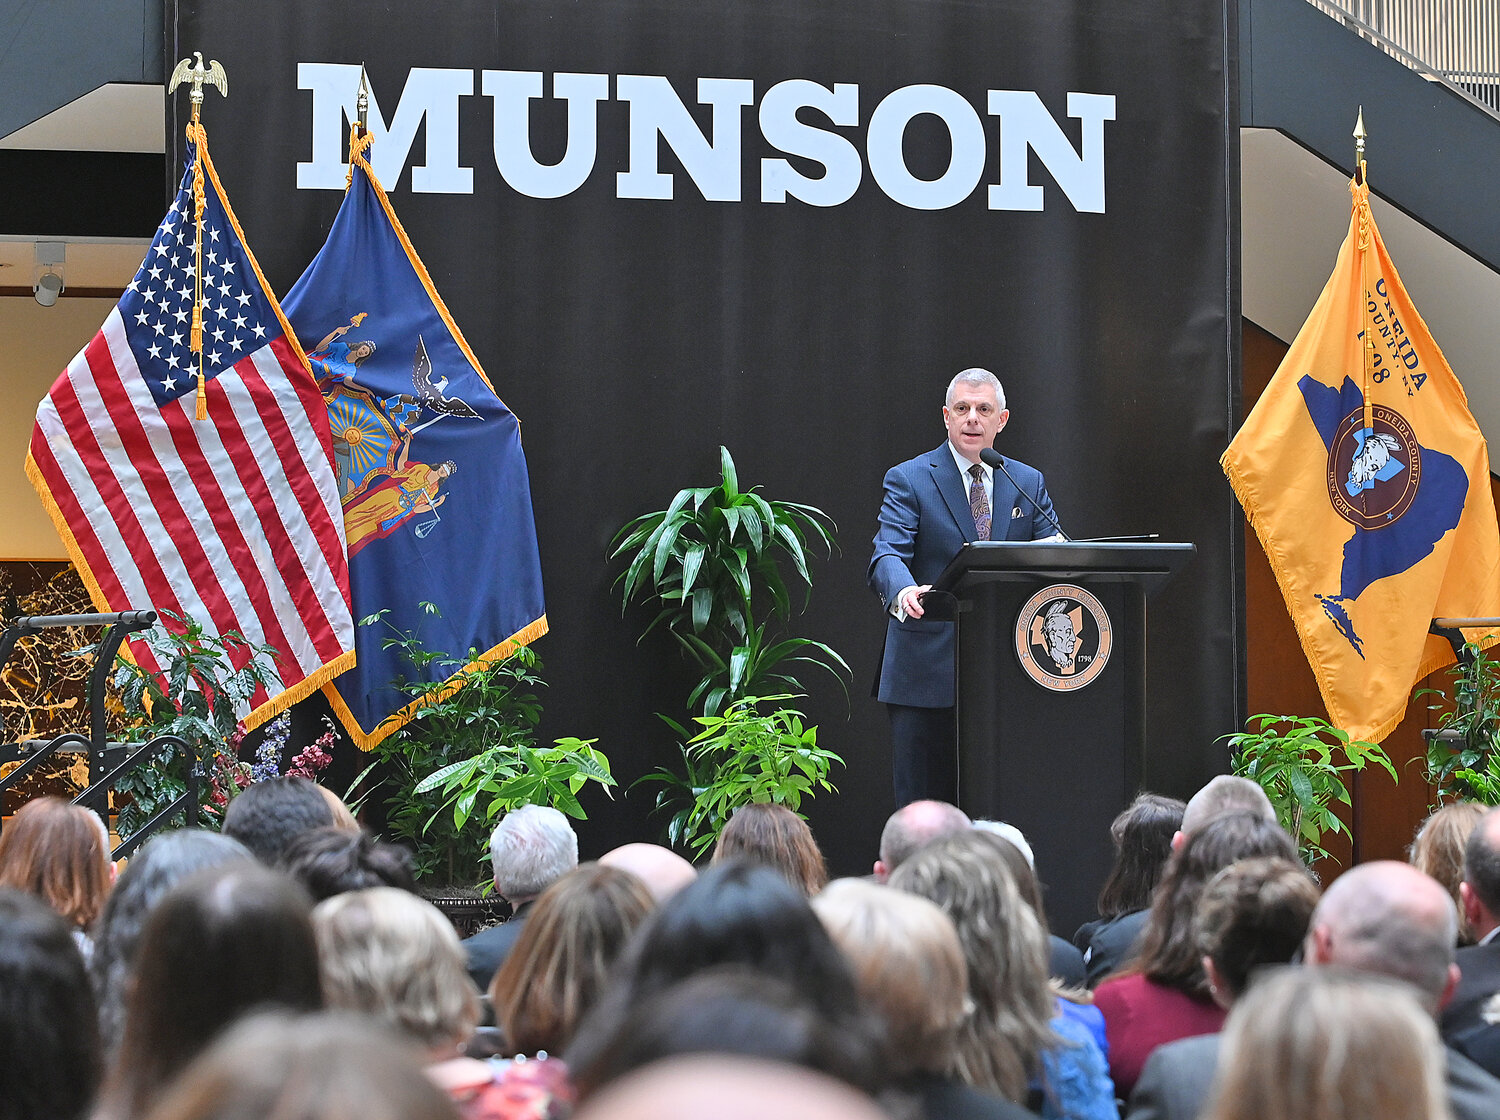 Oneida County Executive Anthony Picente Jr. delivered the State of the County address at Munson in Utica on Wednesday, April 5, 2023.